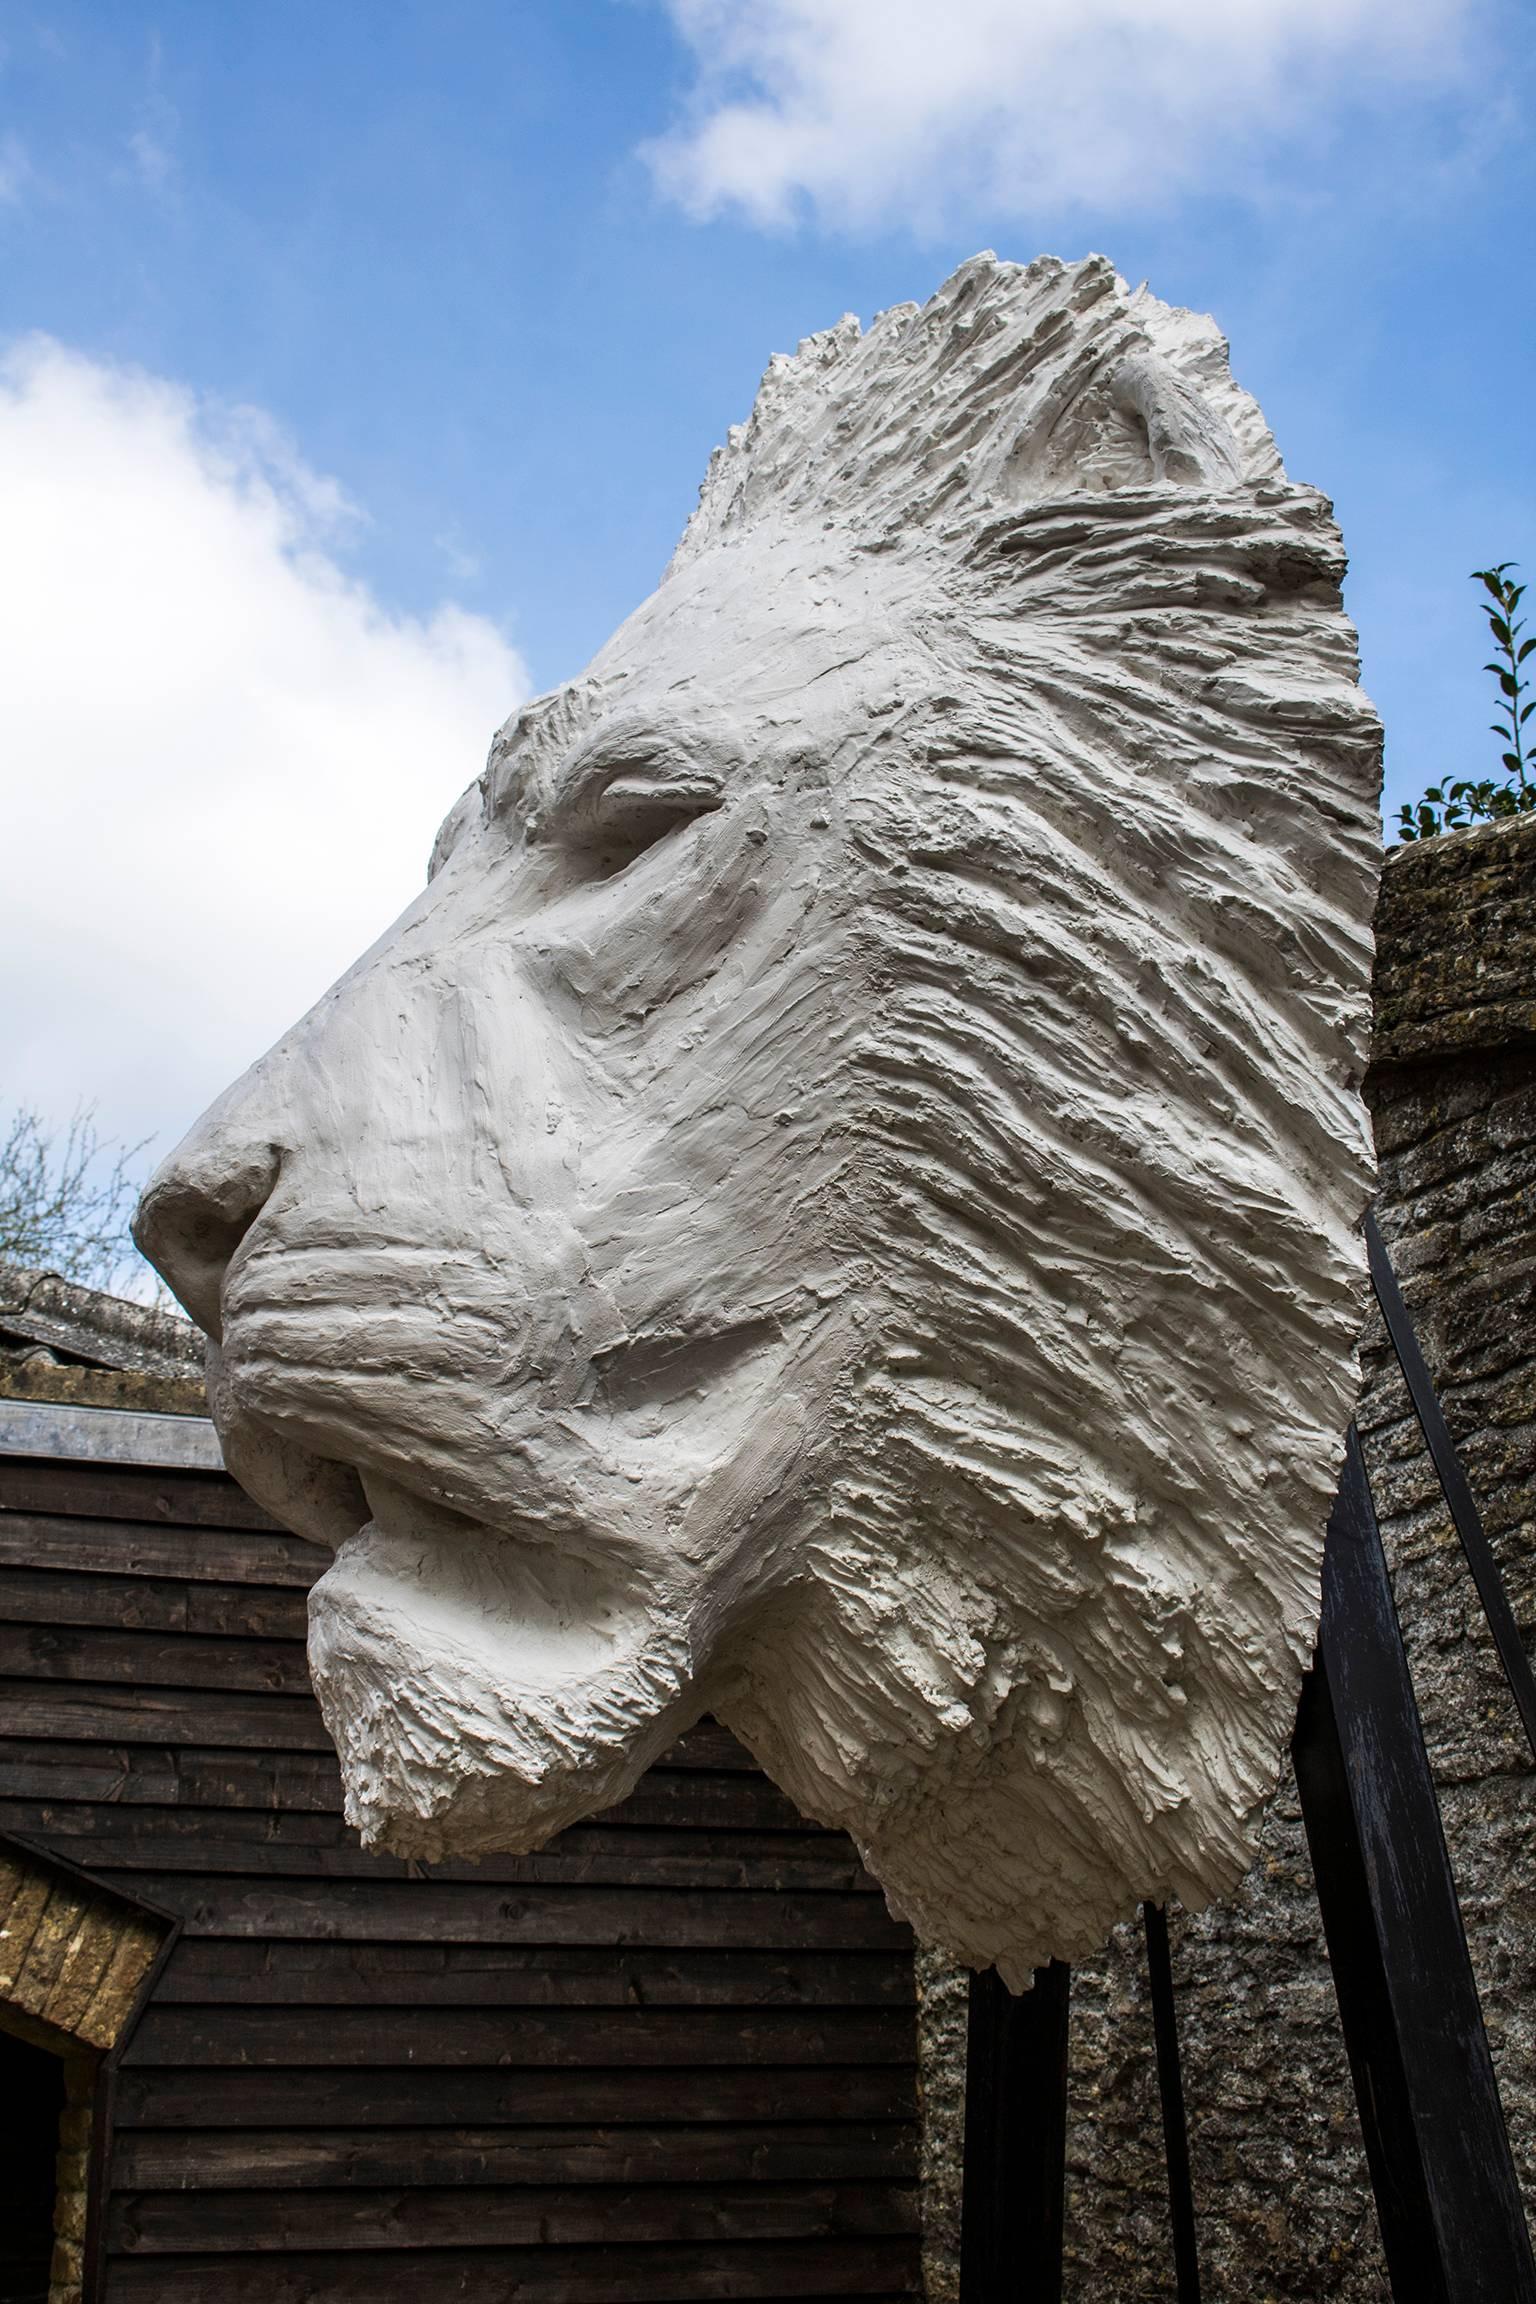 A monumental study of a lion head entitled 'Dawn Patrol' by Bruce Little, sculptor, an edition of the Longleat Lion 50th anniversary celebration, sculpted in white marble resin and mounted on a metal display frame .

Please note, measurements